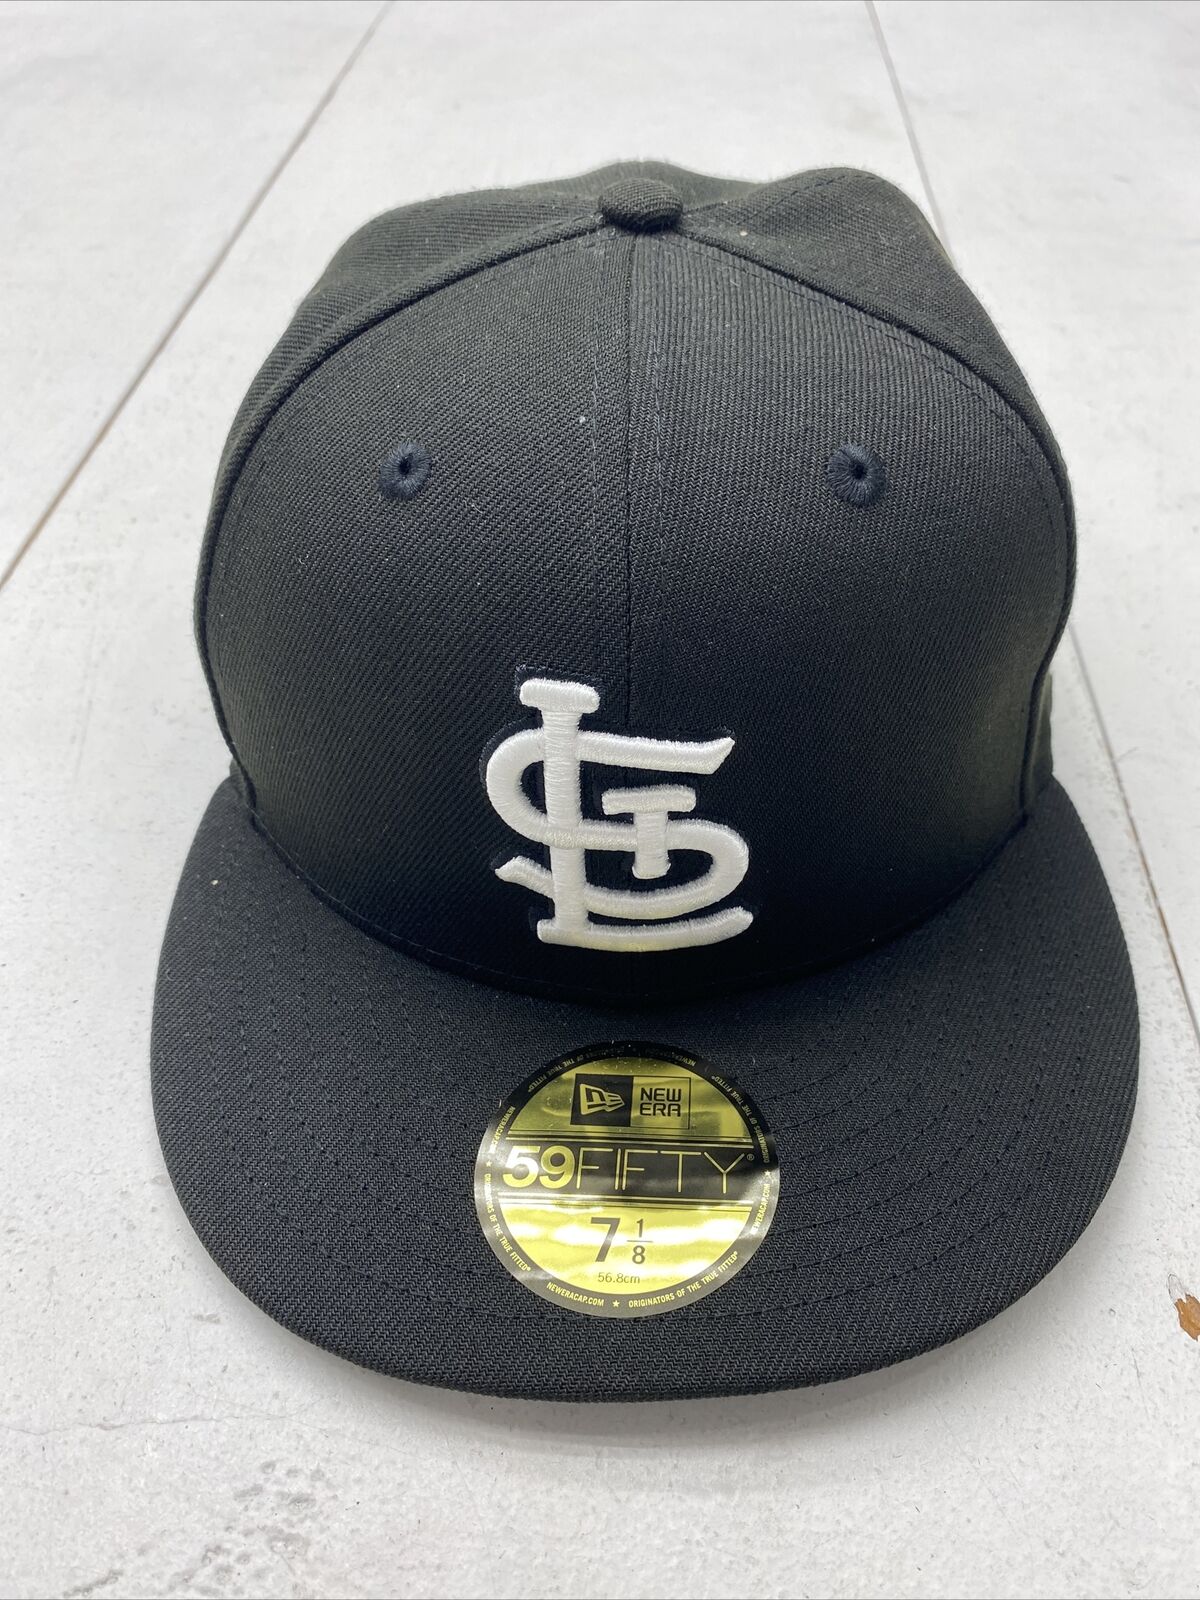 St. Louis Cardinals New Era Black White 59Fifty MLB Fitted Hat